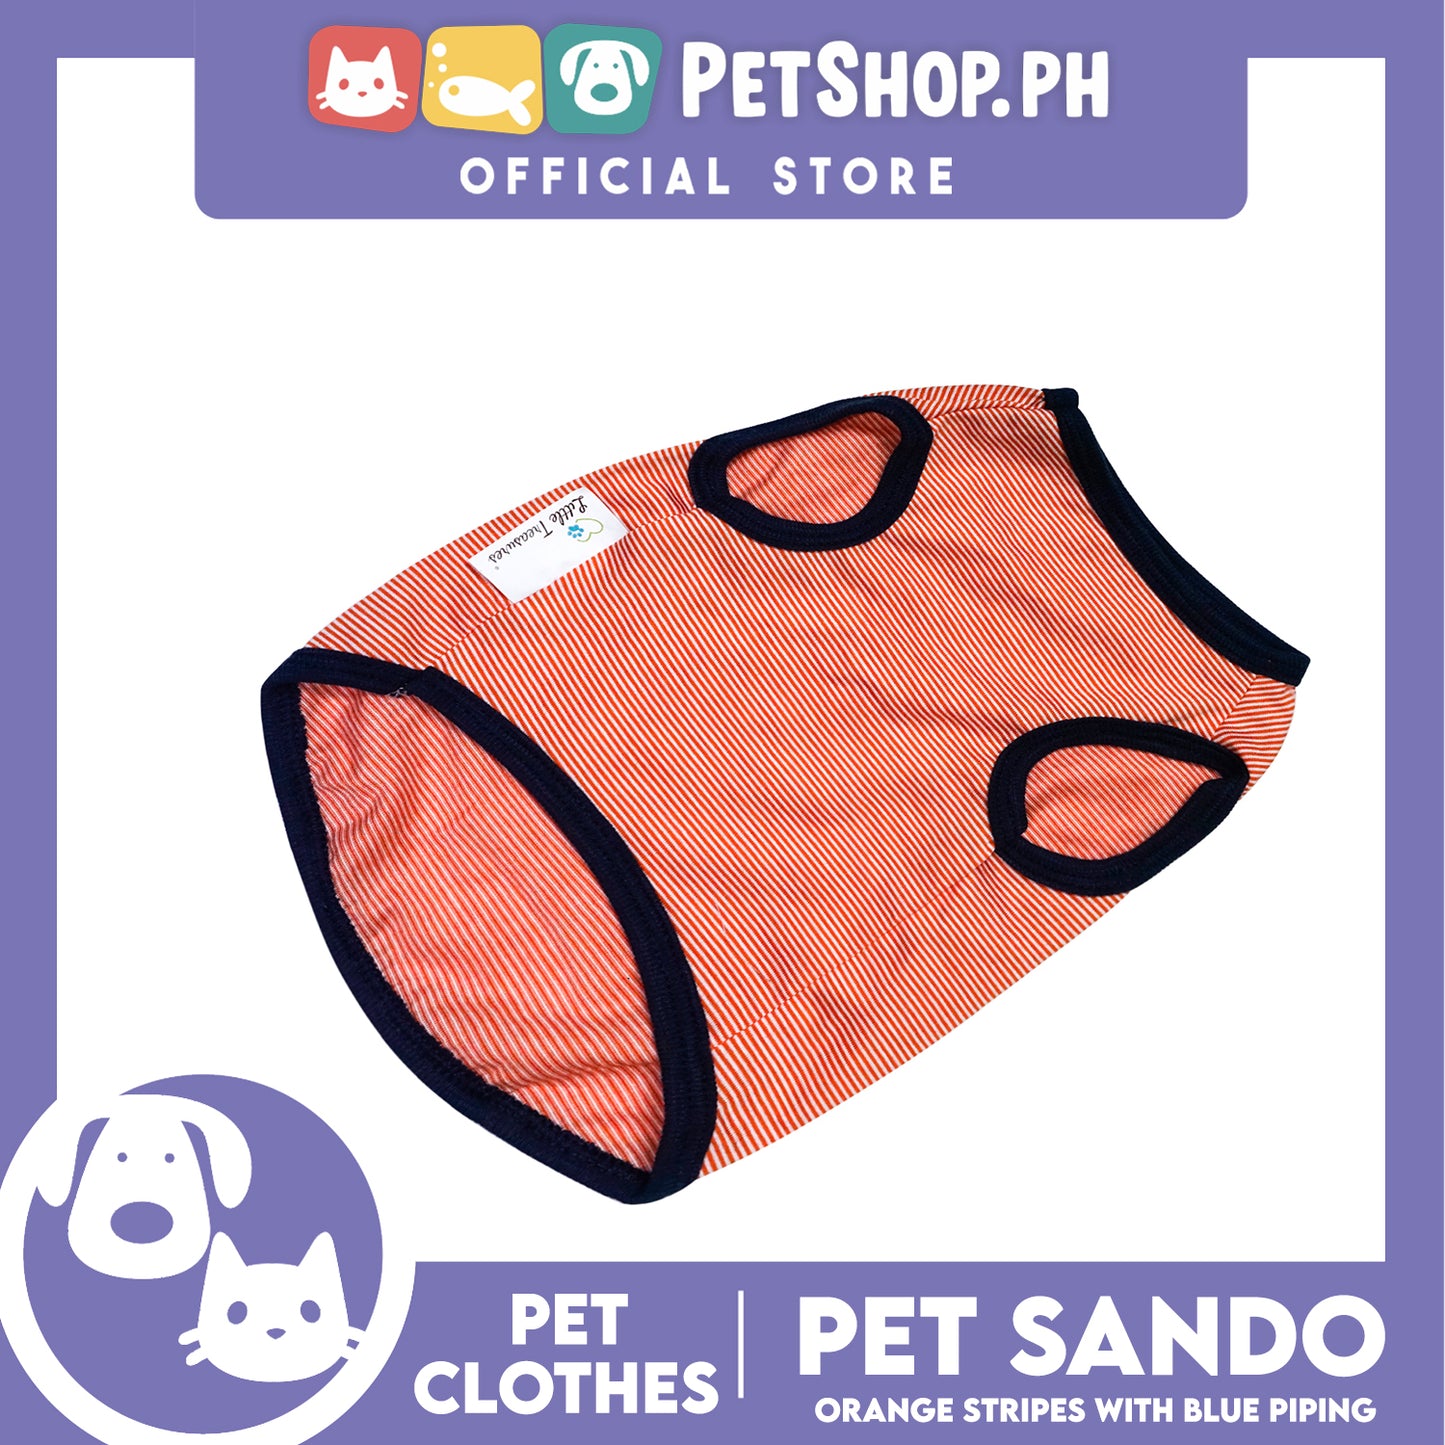 Pet Sando Orange Stripes with Blue Piping (Medium) Pet Shirt Clothes Dress Perfect fit for Dogs